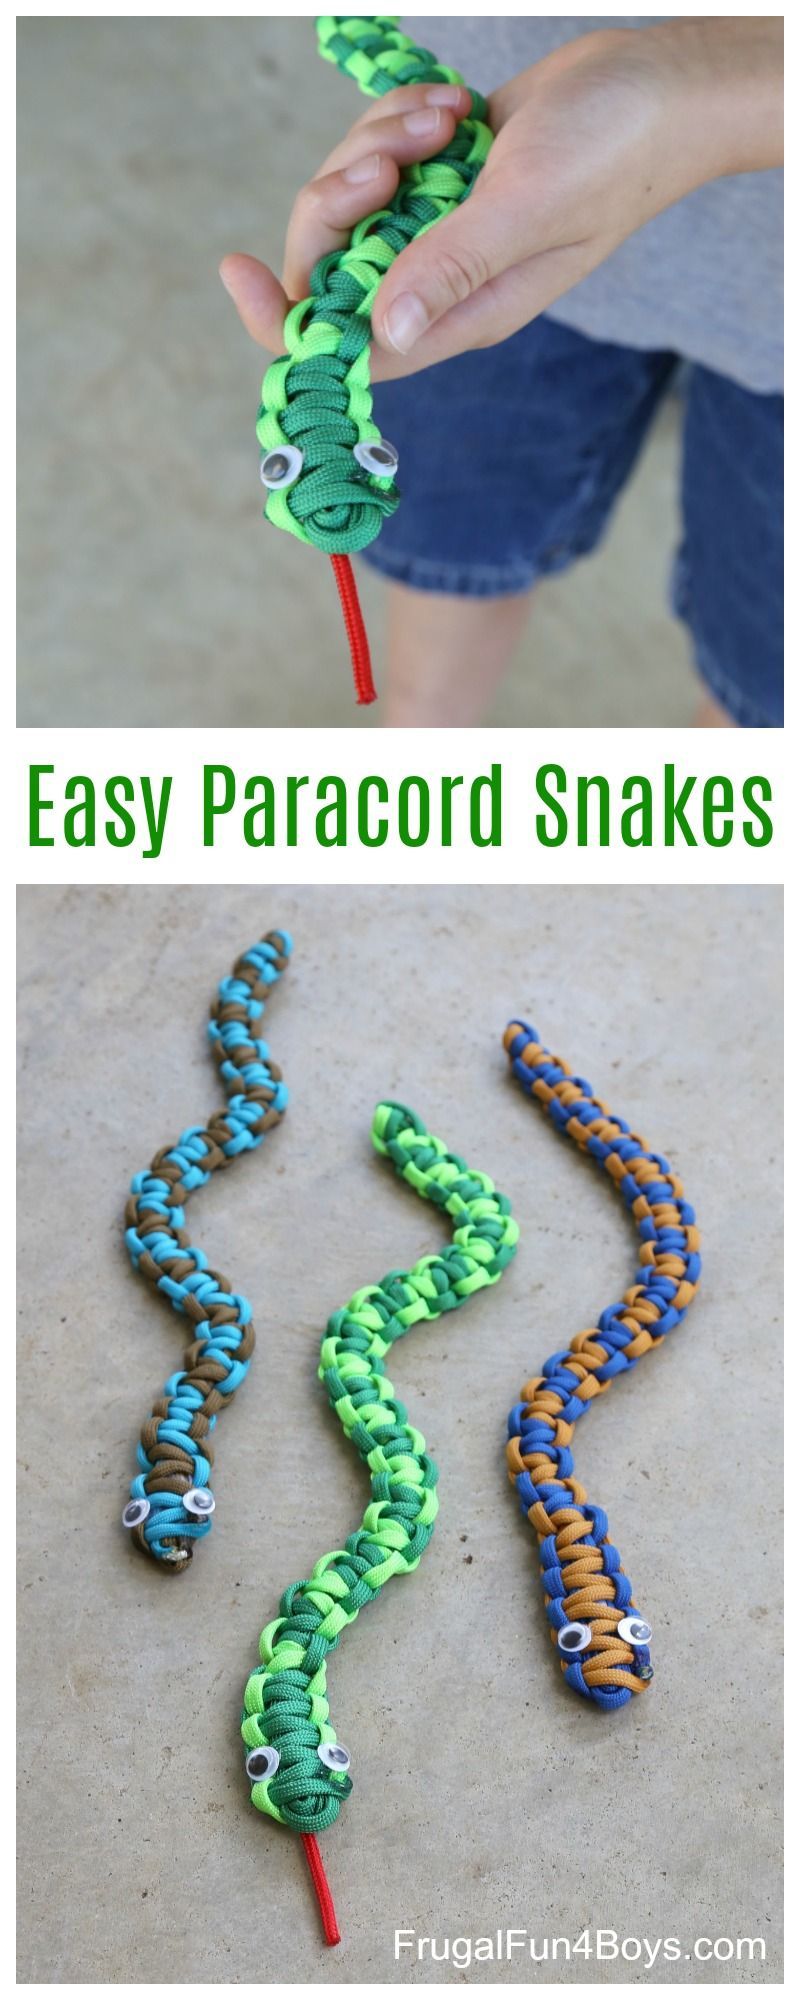 Here’s a fun paracord project for kids – make paracord snakes! This would be a great craft project for a summer camp or nature